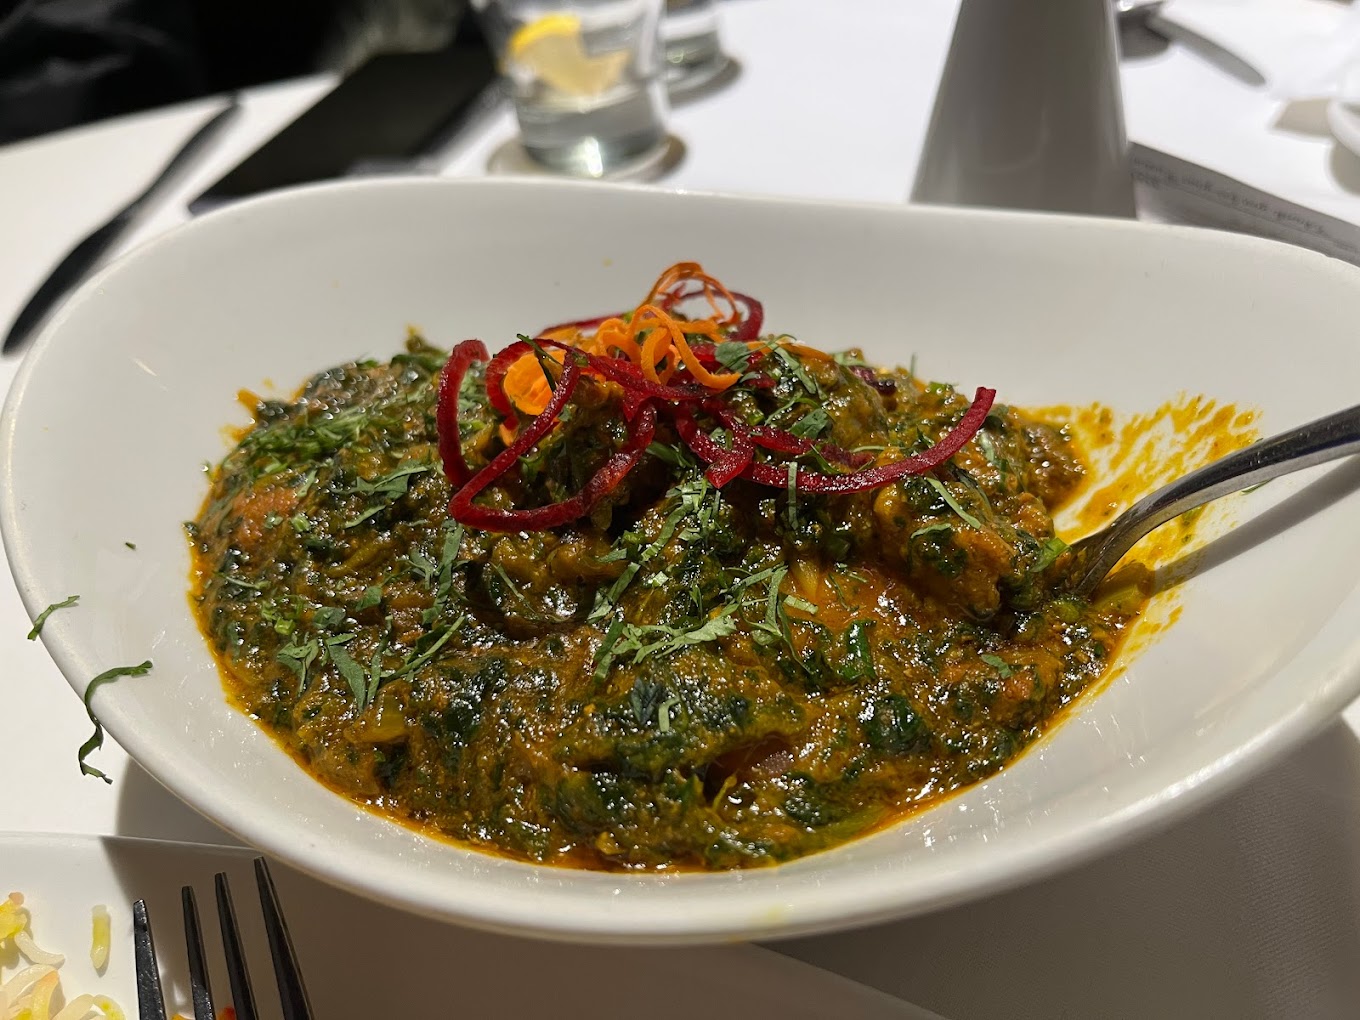 Explore the vibrant flavours of Twickenham's Indian restaurants, from traditional curries to innovative fusion dishes. Discover delicious cuisine and inviting atmospheres at the best Indian restaurants in Twickenham.